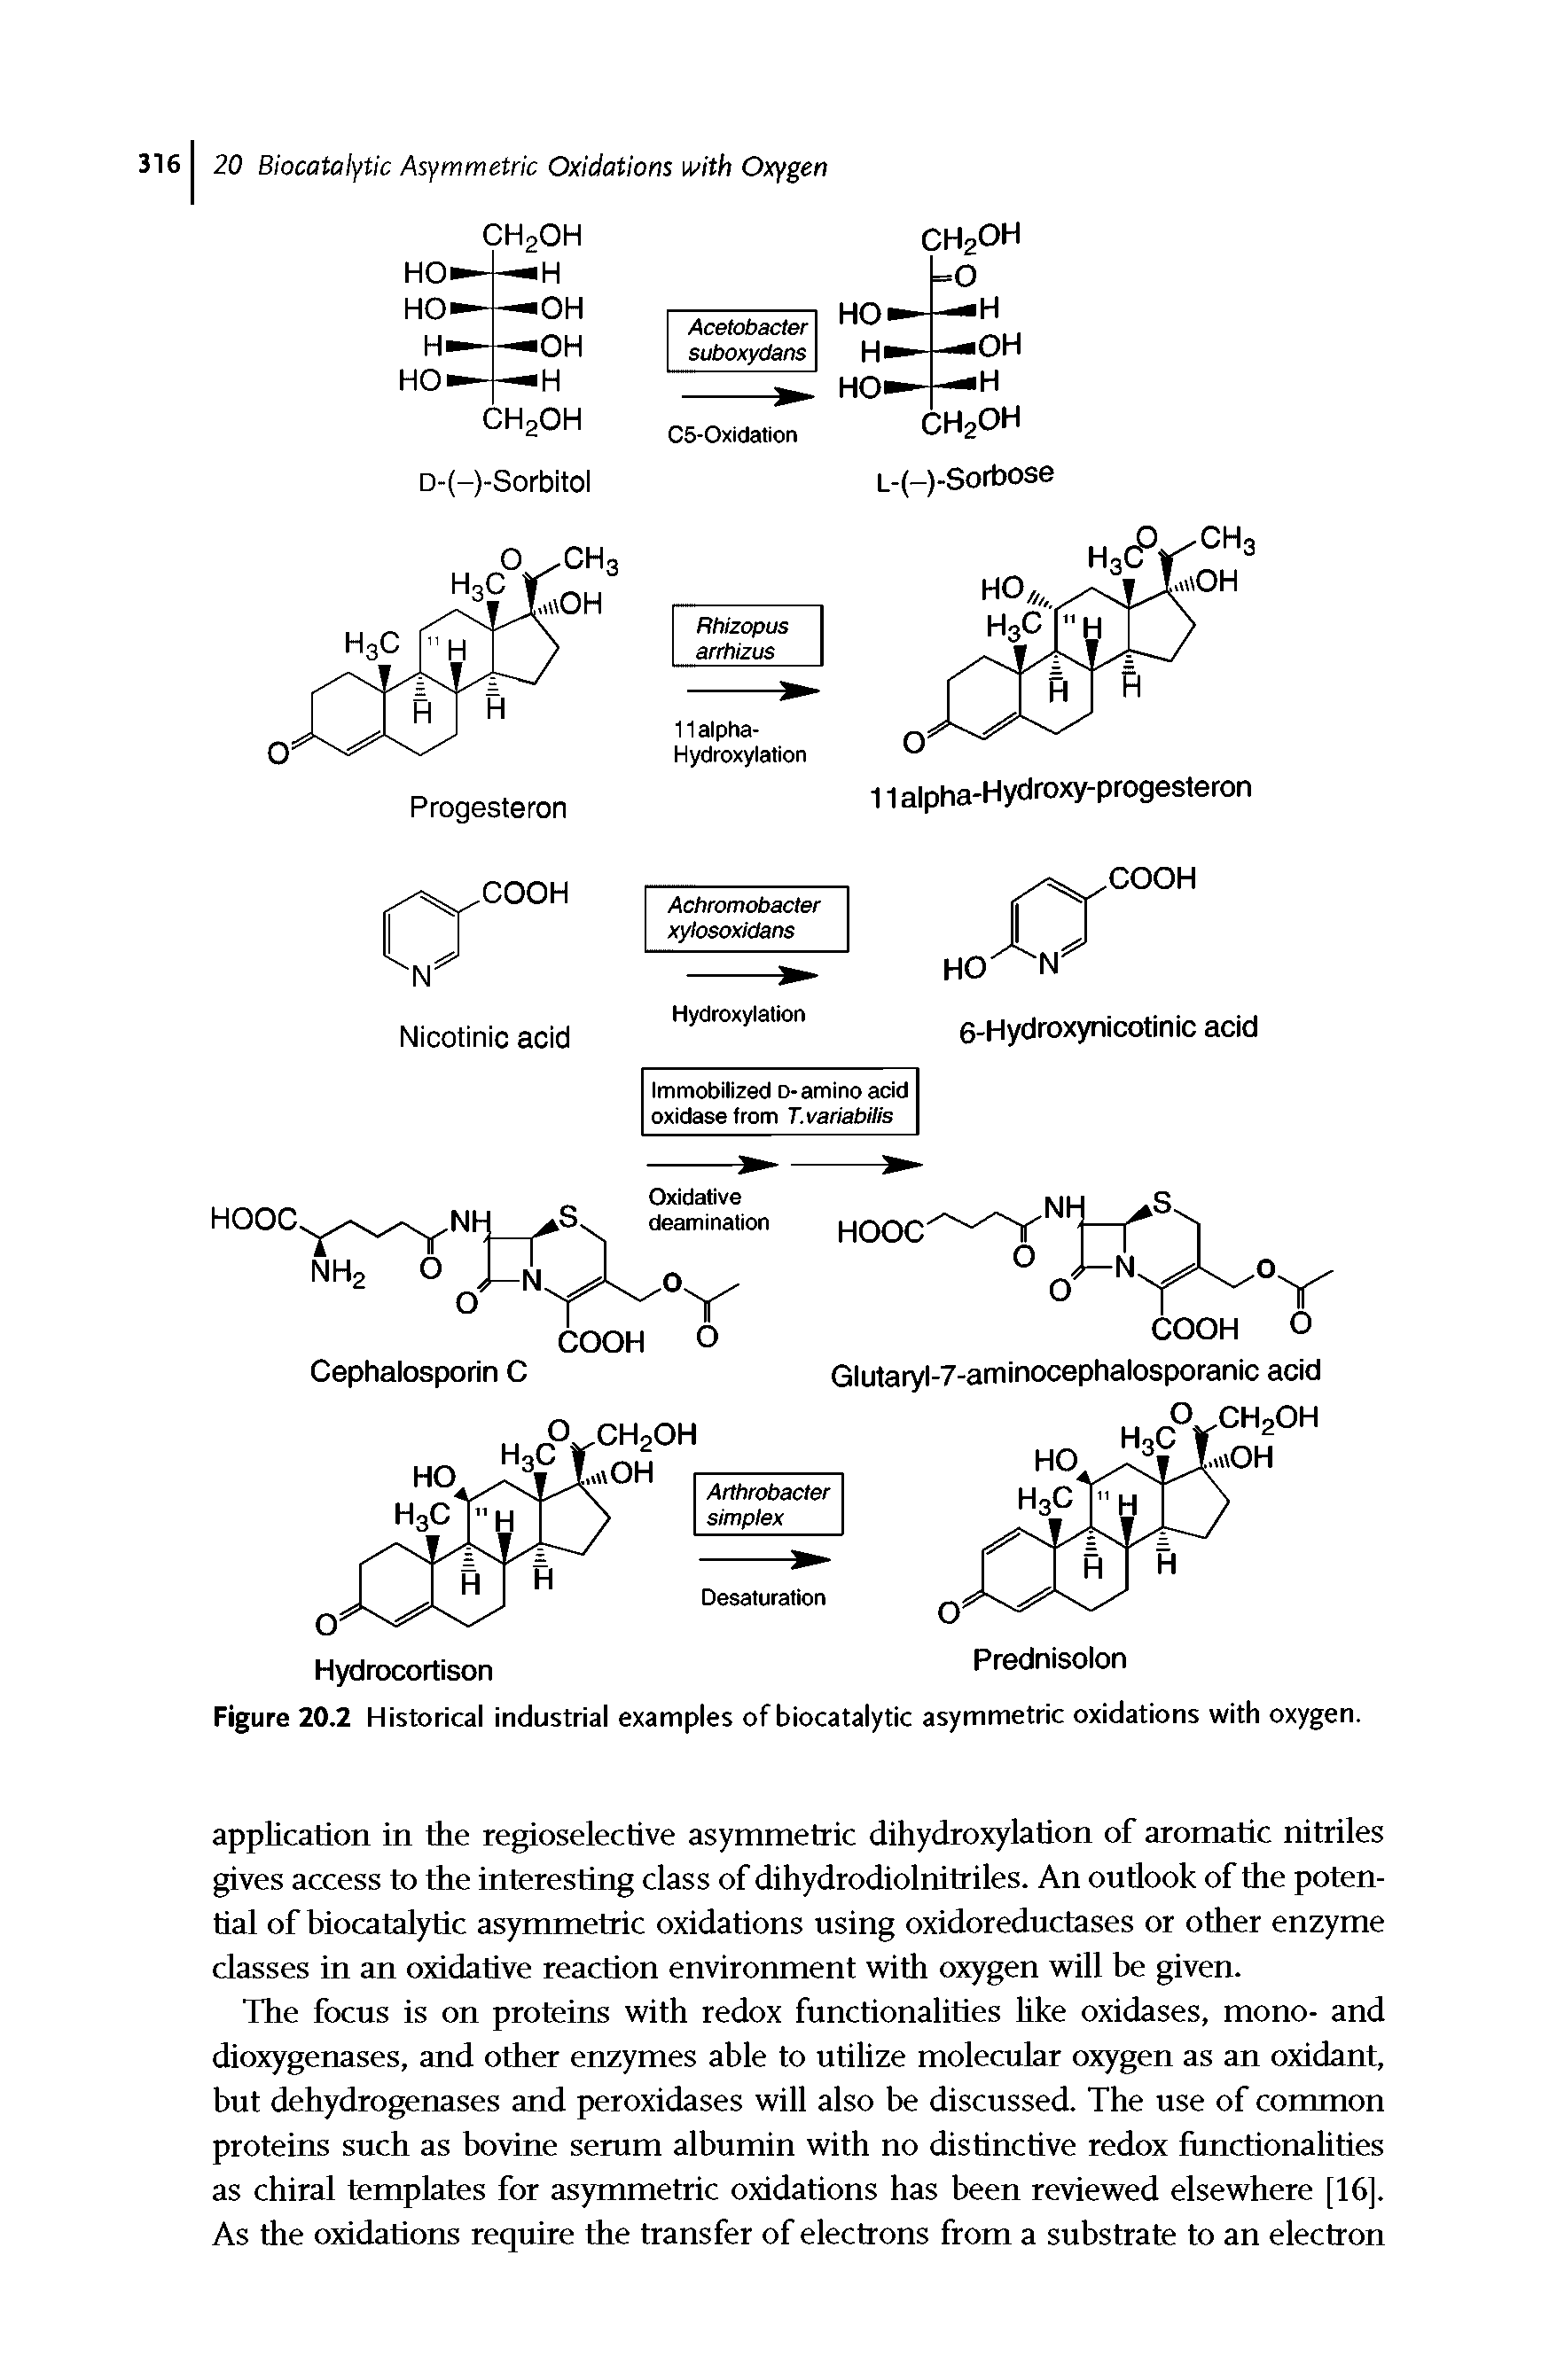 Figure 20.2 Historical industrial examples of biocatalytic asymmetric oxidations with oxygen.